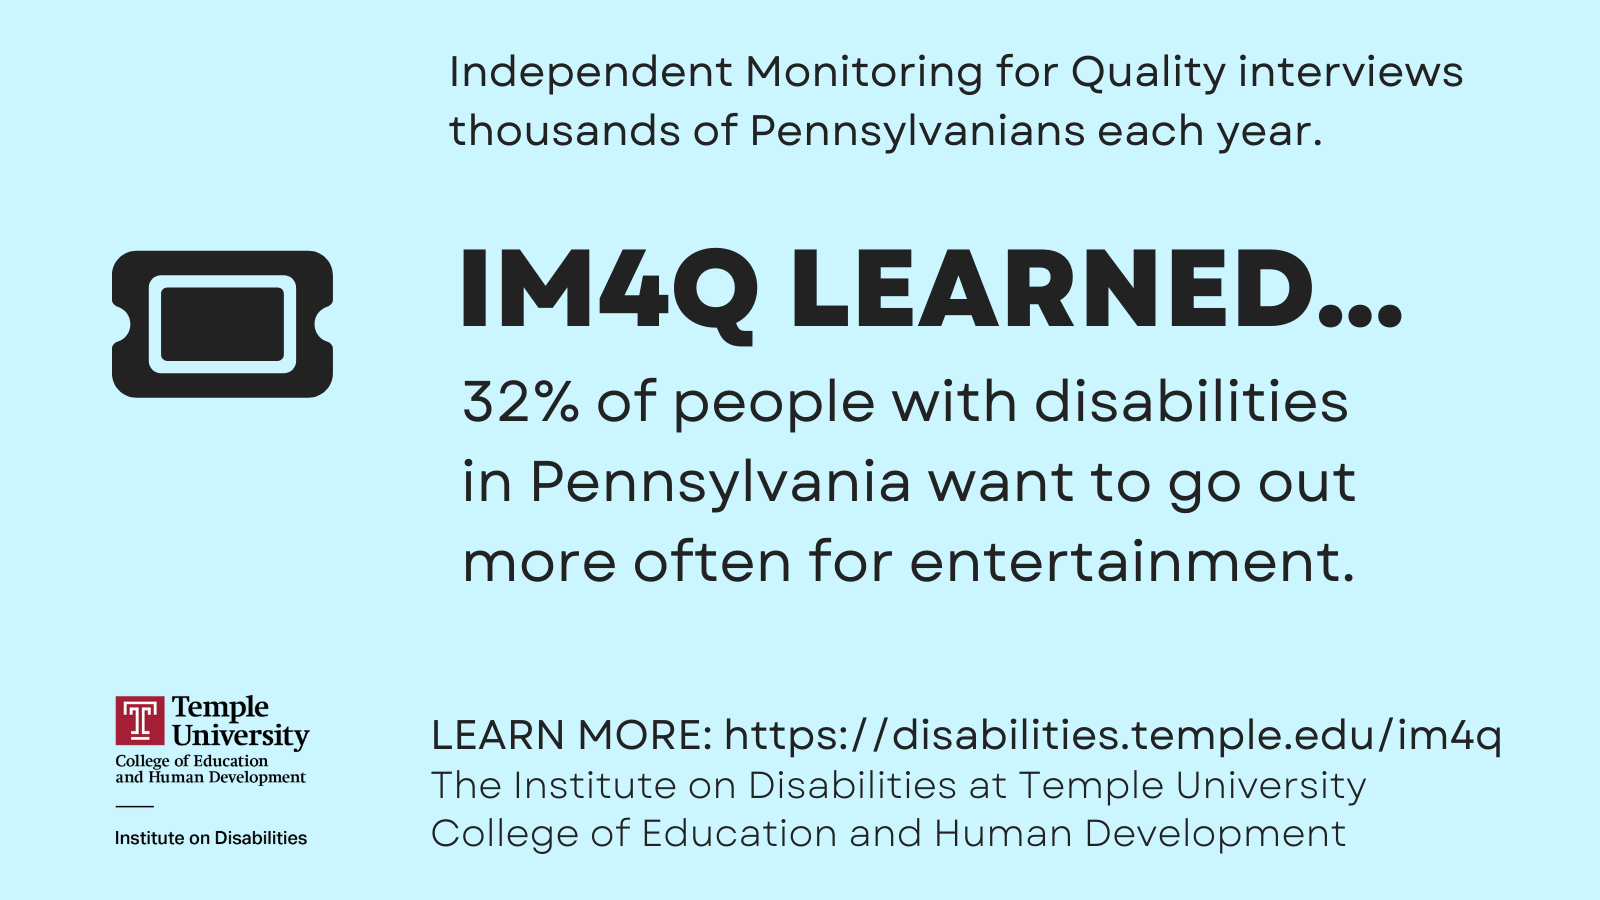 32% of people with disabilities in Pennsylvania want to go out more often for entertainment.